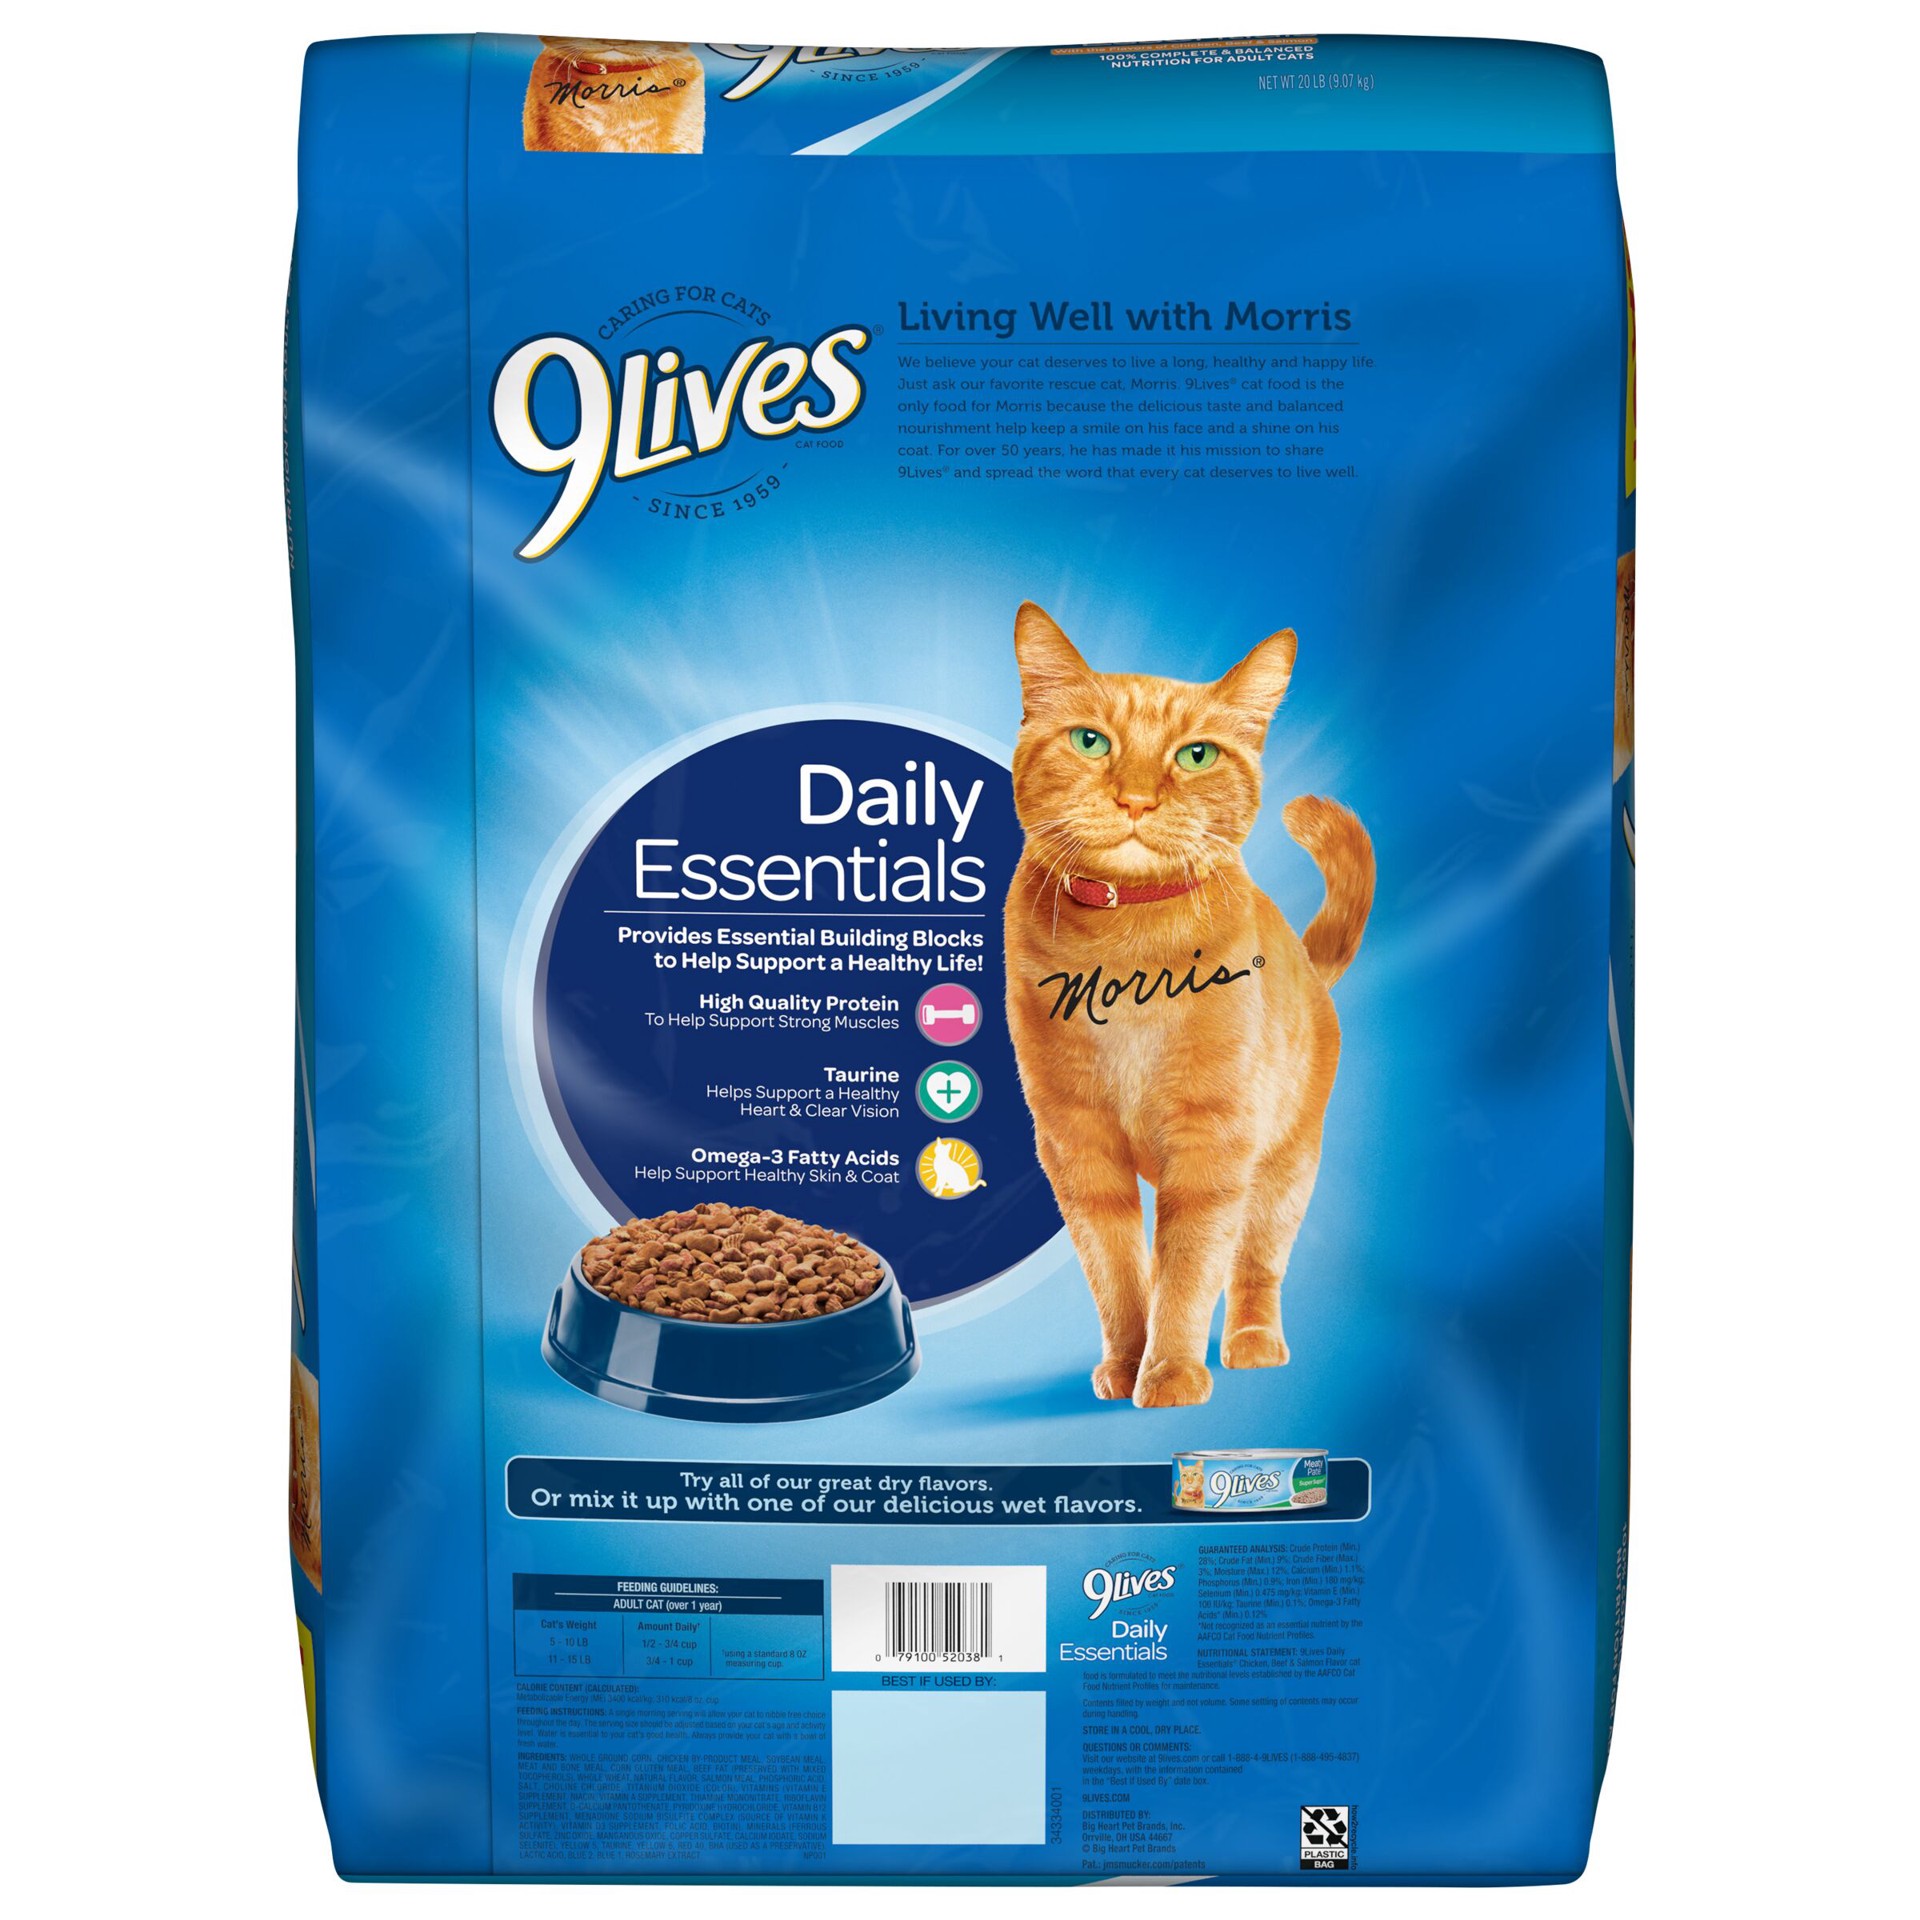 slide 5 of 5, 9Lives Daily Essentials Dry Cat Food, 20 lb